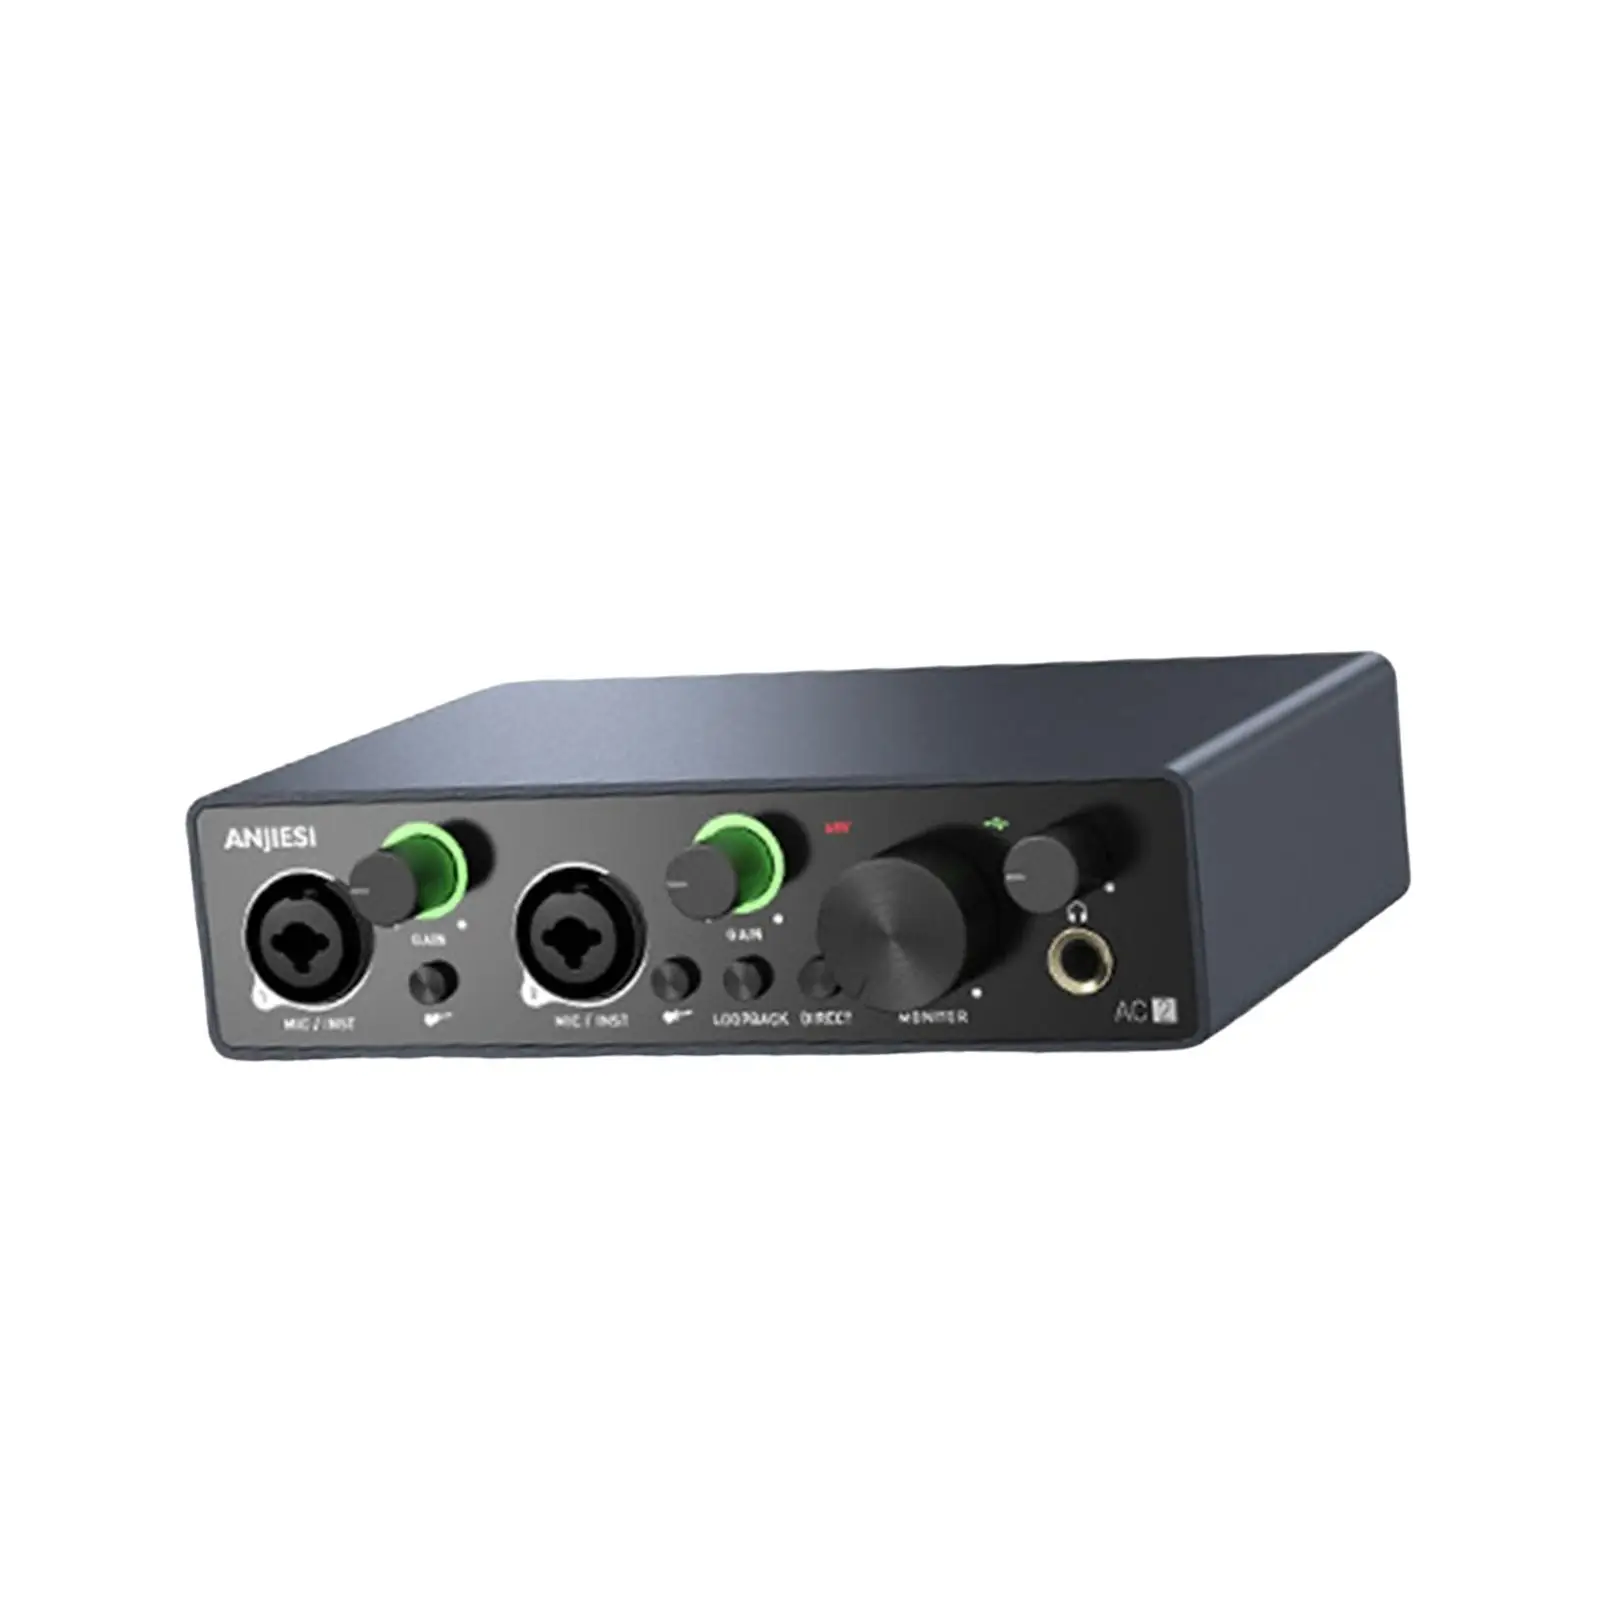 USB Audio Interface 2 Input 24Bit/196KHz Plug and Play for Podcasting Vocalist Podcaster